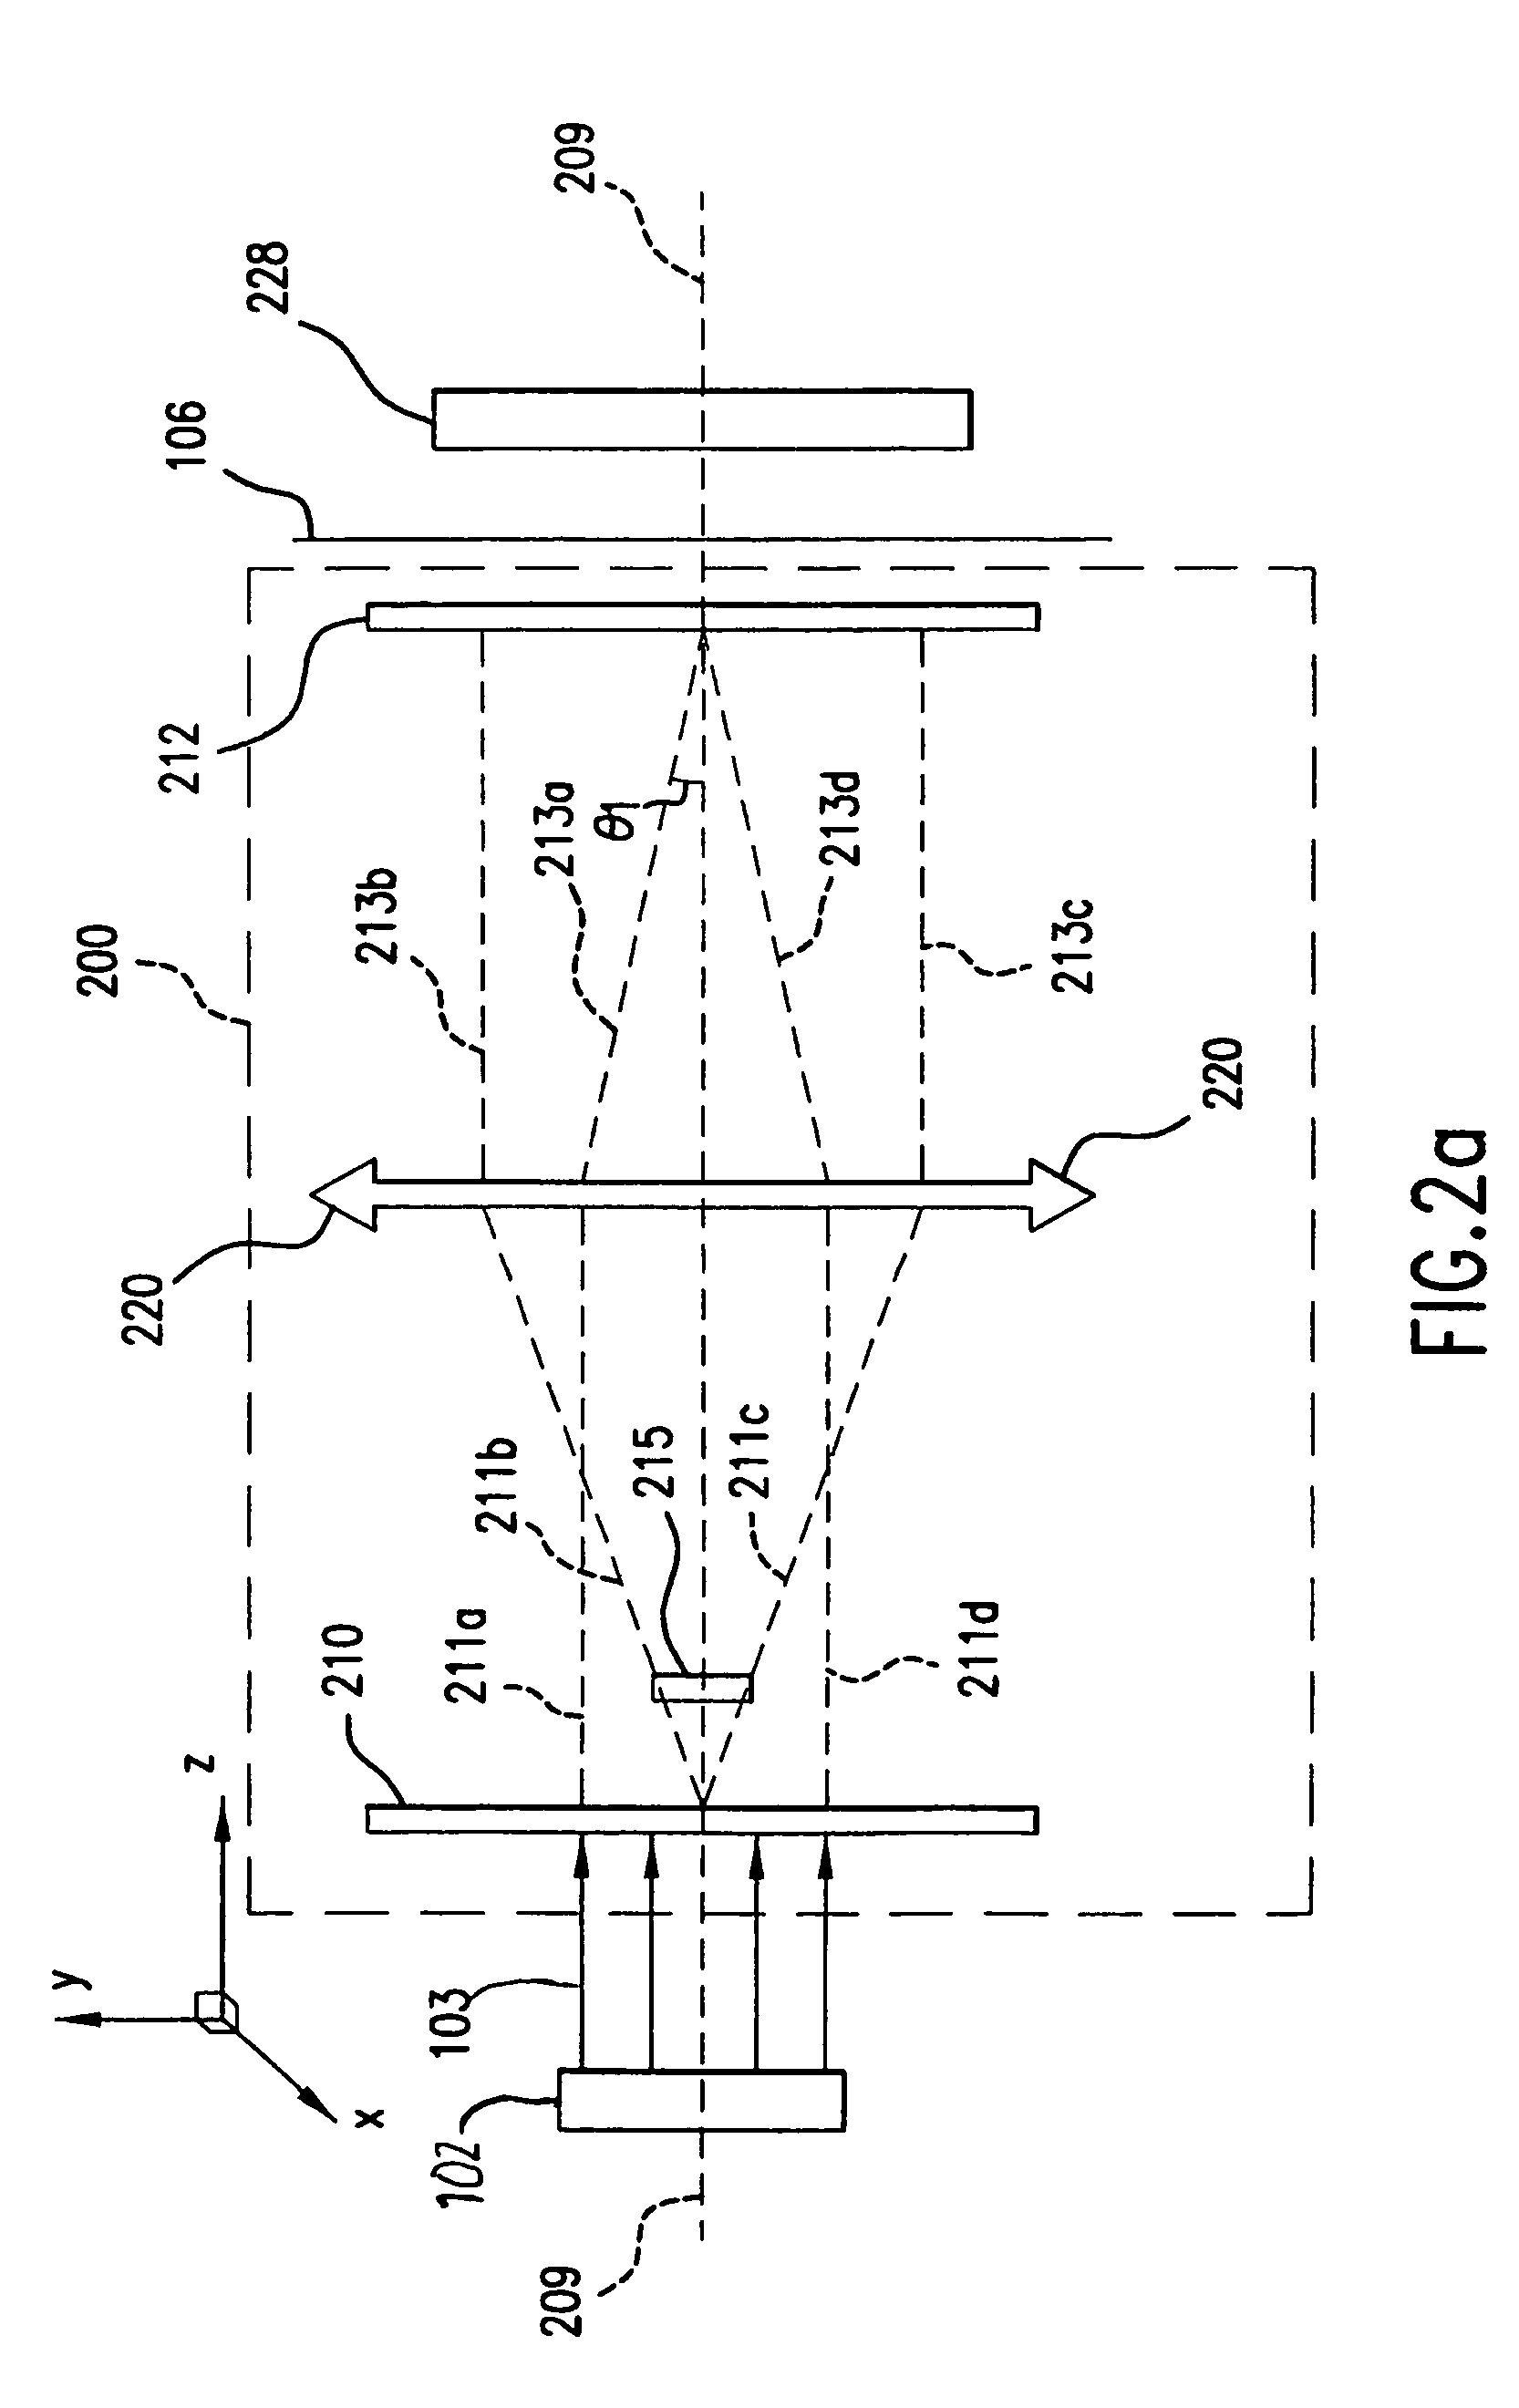 Illumination system and method allowing for varying of both field height and pupil